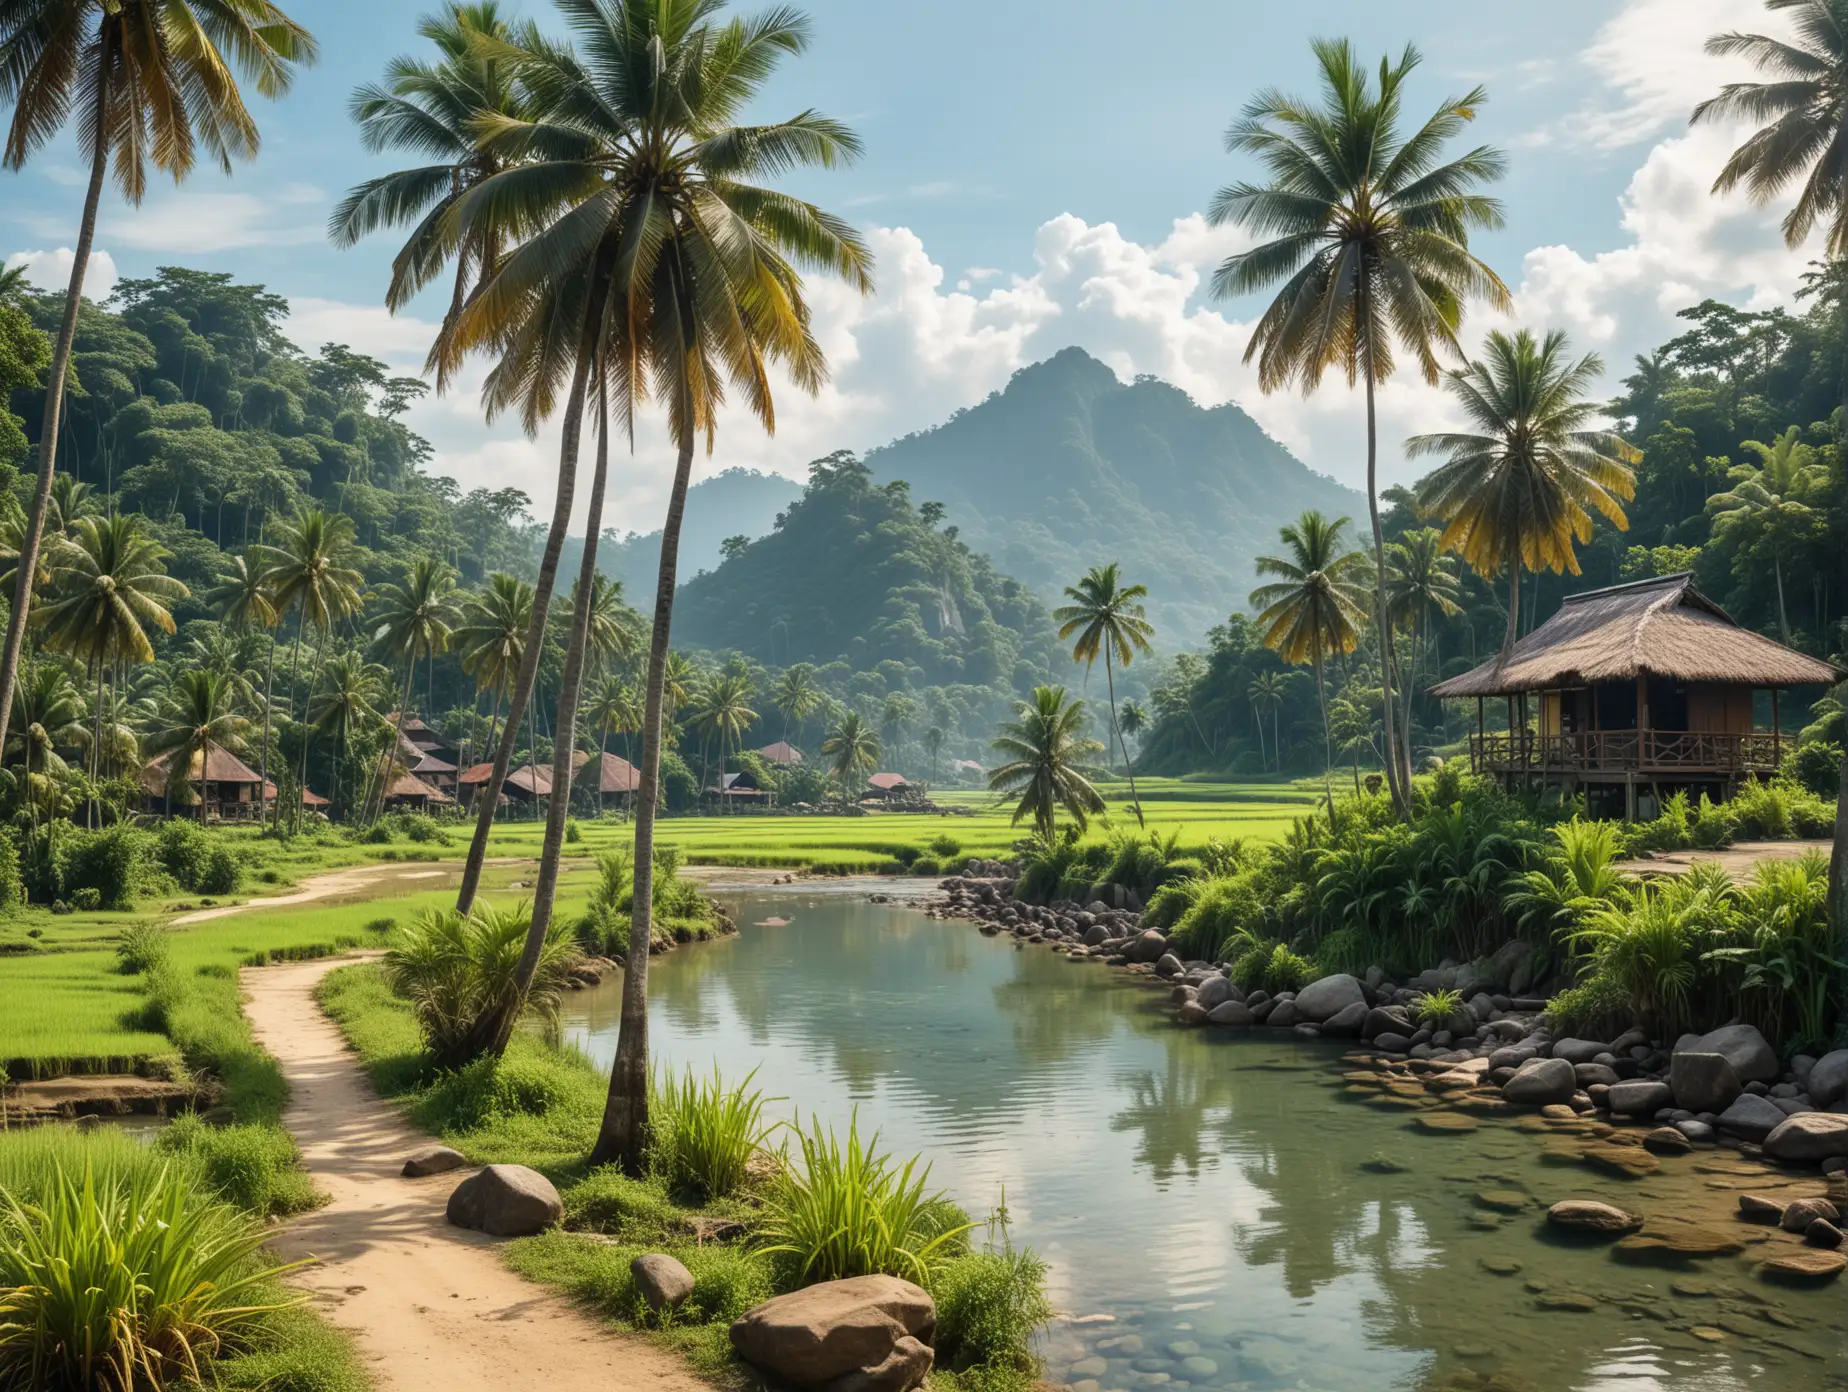 Tranquil Indonesian Village Waterfalls Rice Fields and Fishing